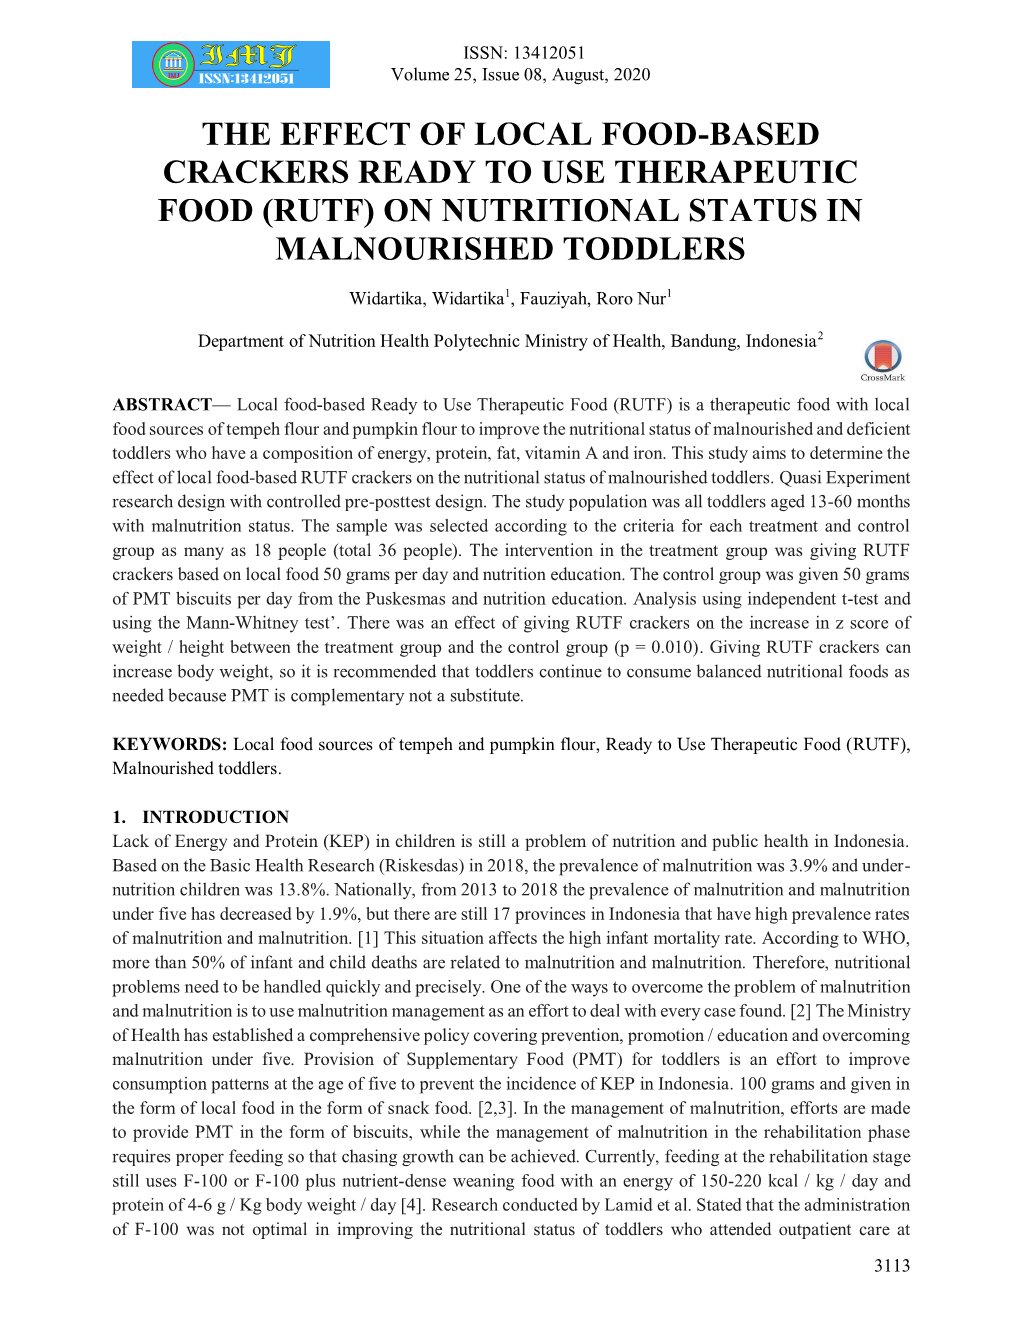 (Rutf) on Nutritional Status in Malnourished Toddlers